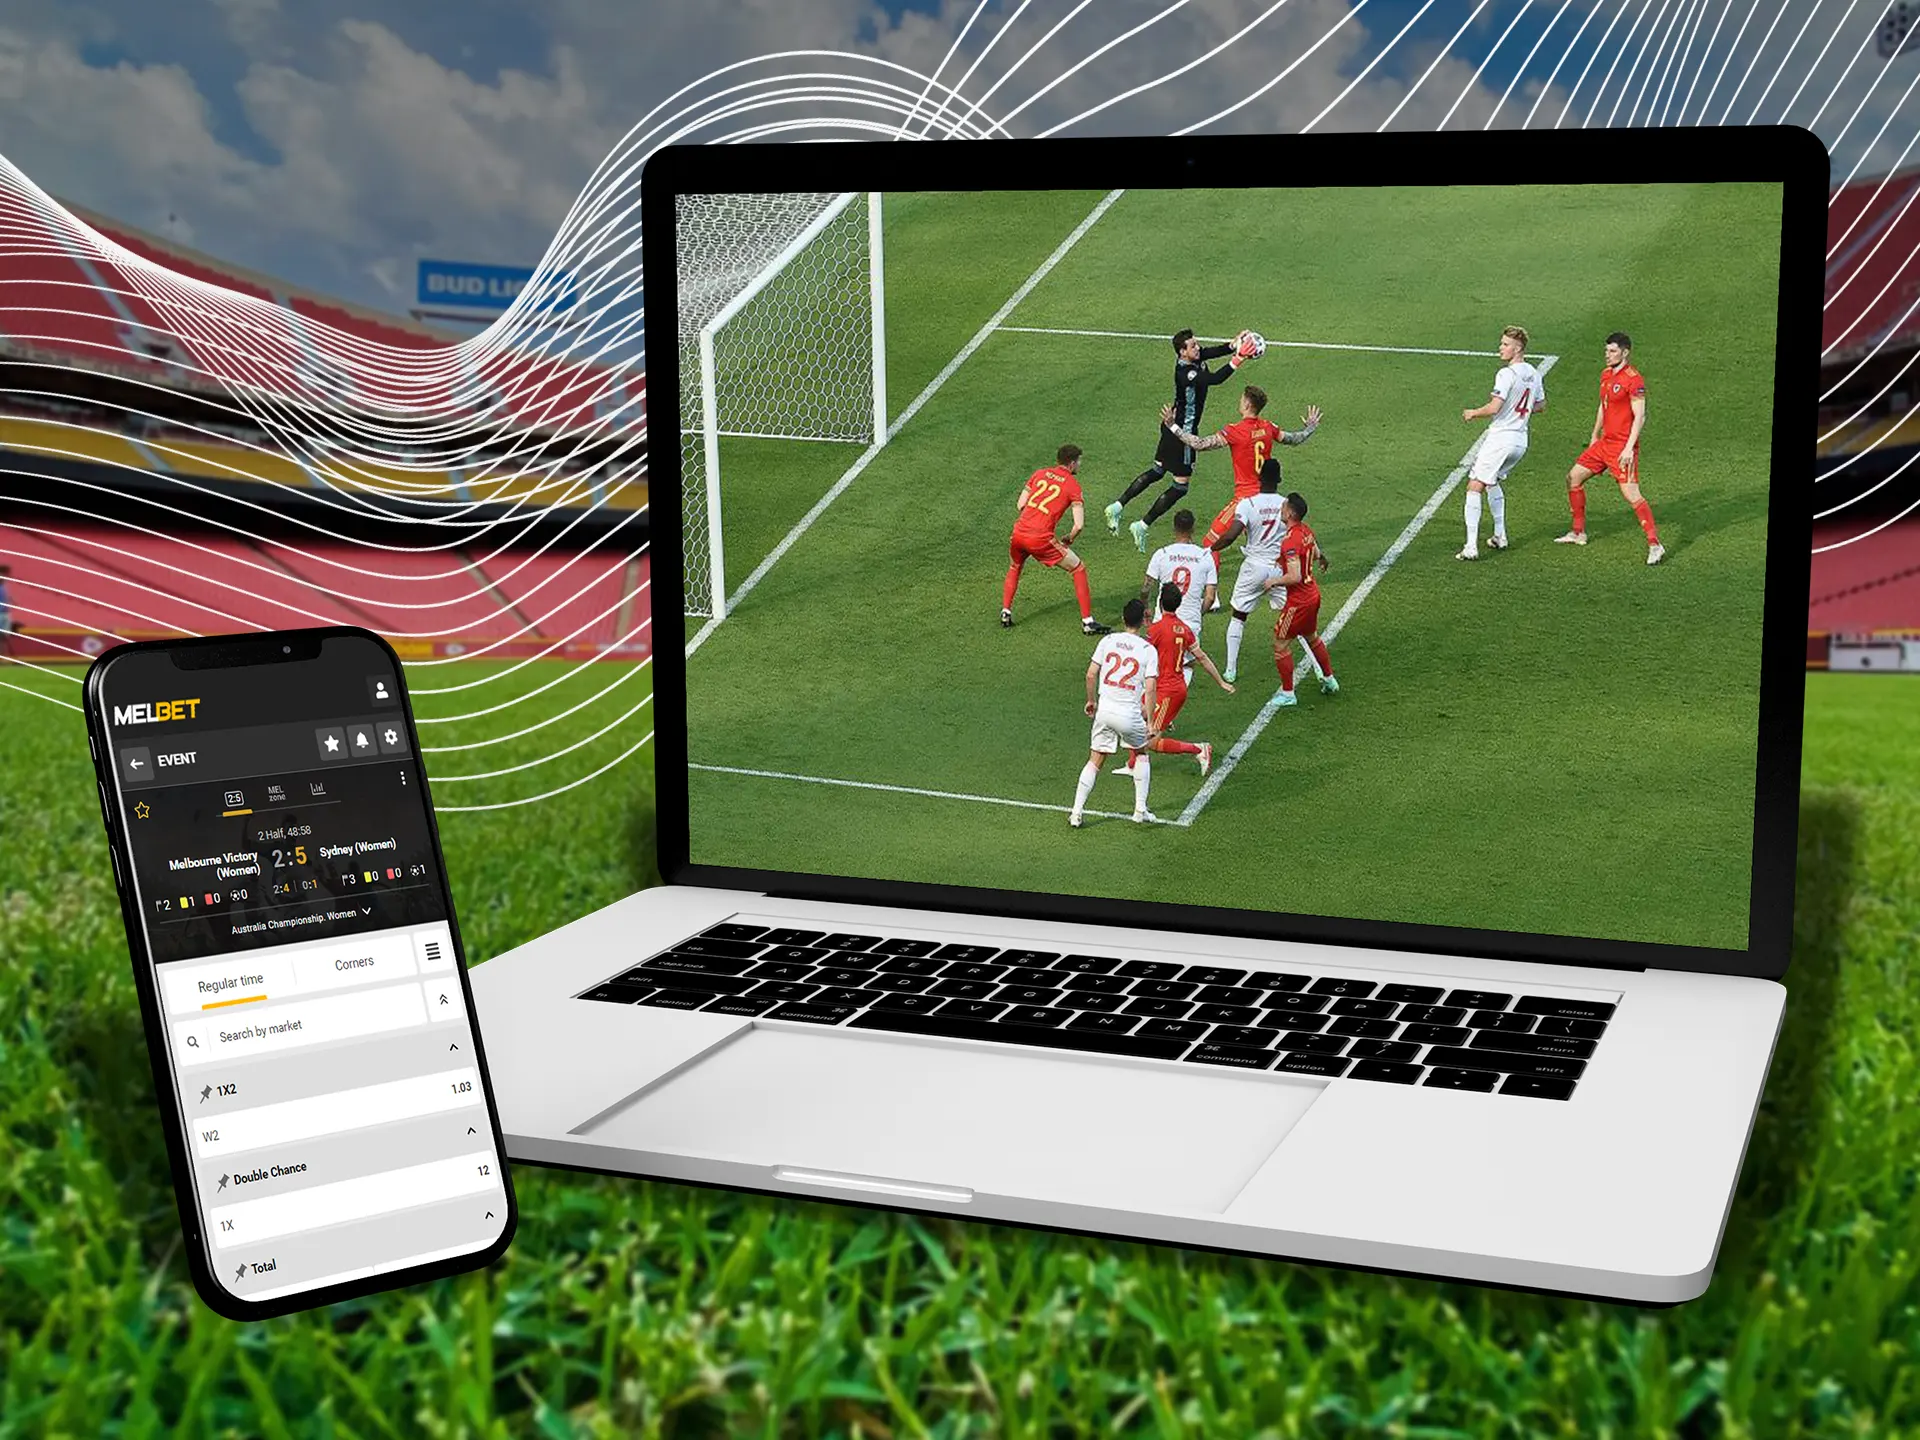 Watch matches in live format at Melbet.